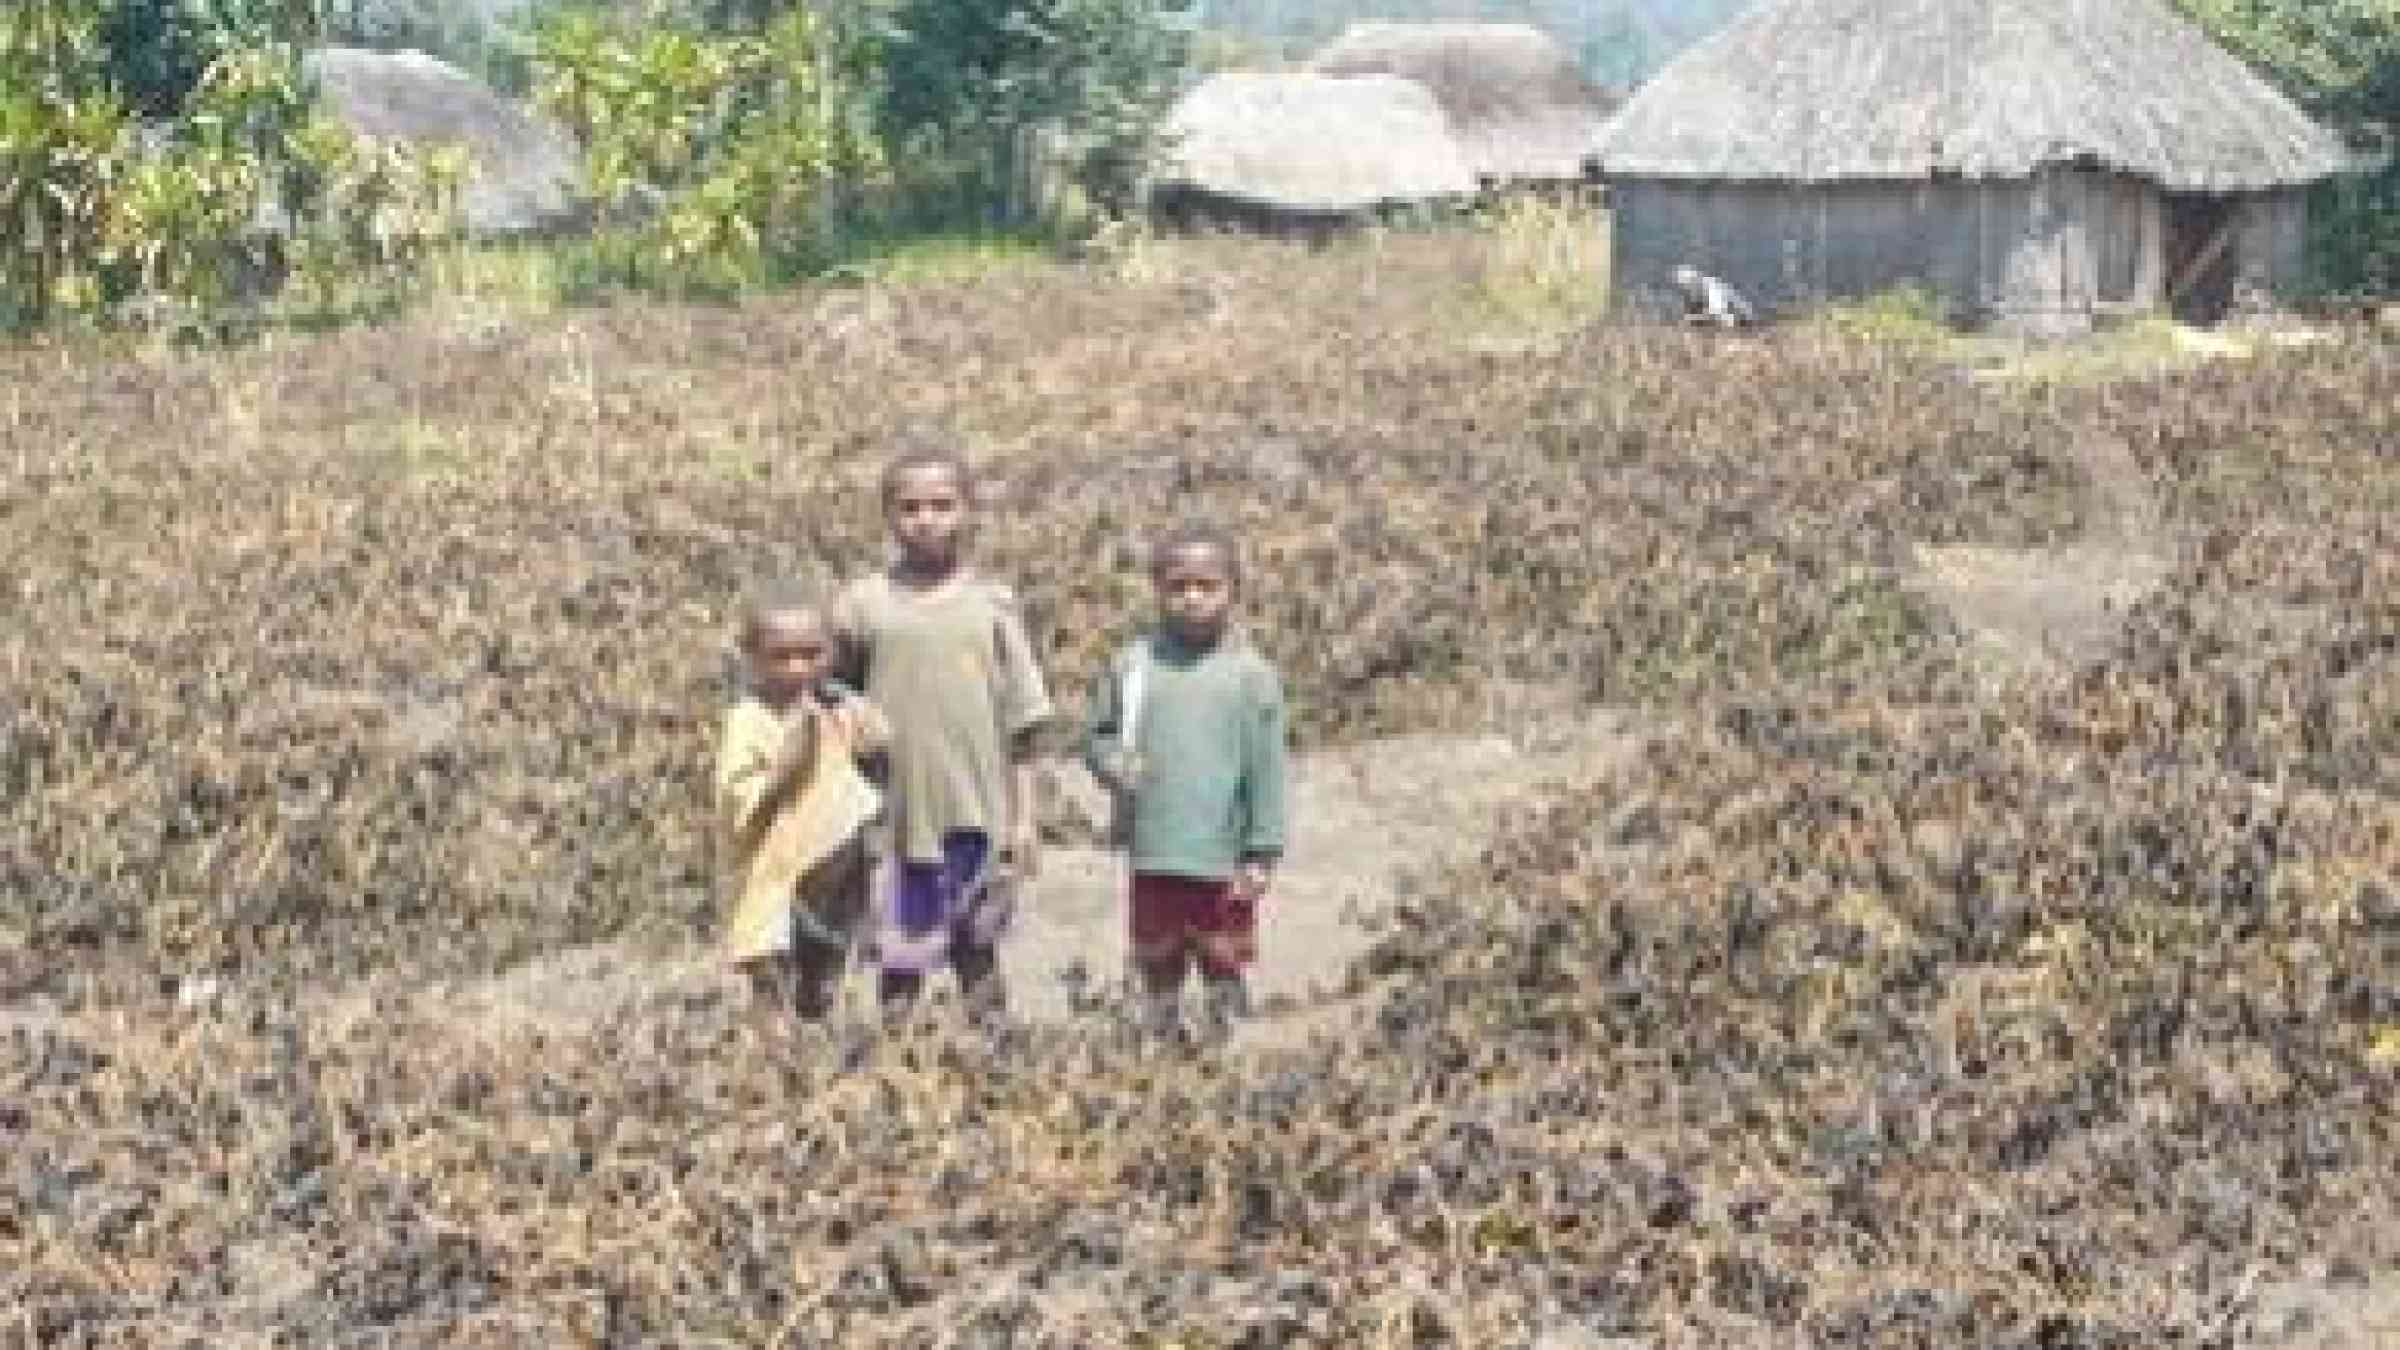 Children from a village in Papua New Guinea’s Western Highlands Province stand in one of countless sweet potato gardens destroyed by frost across the country, by Kud Sitango, August 2015, CC BY-NC-ND